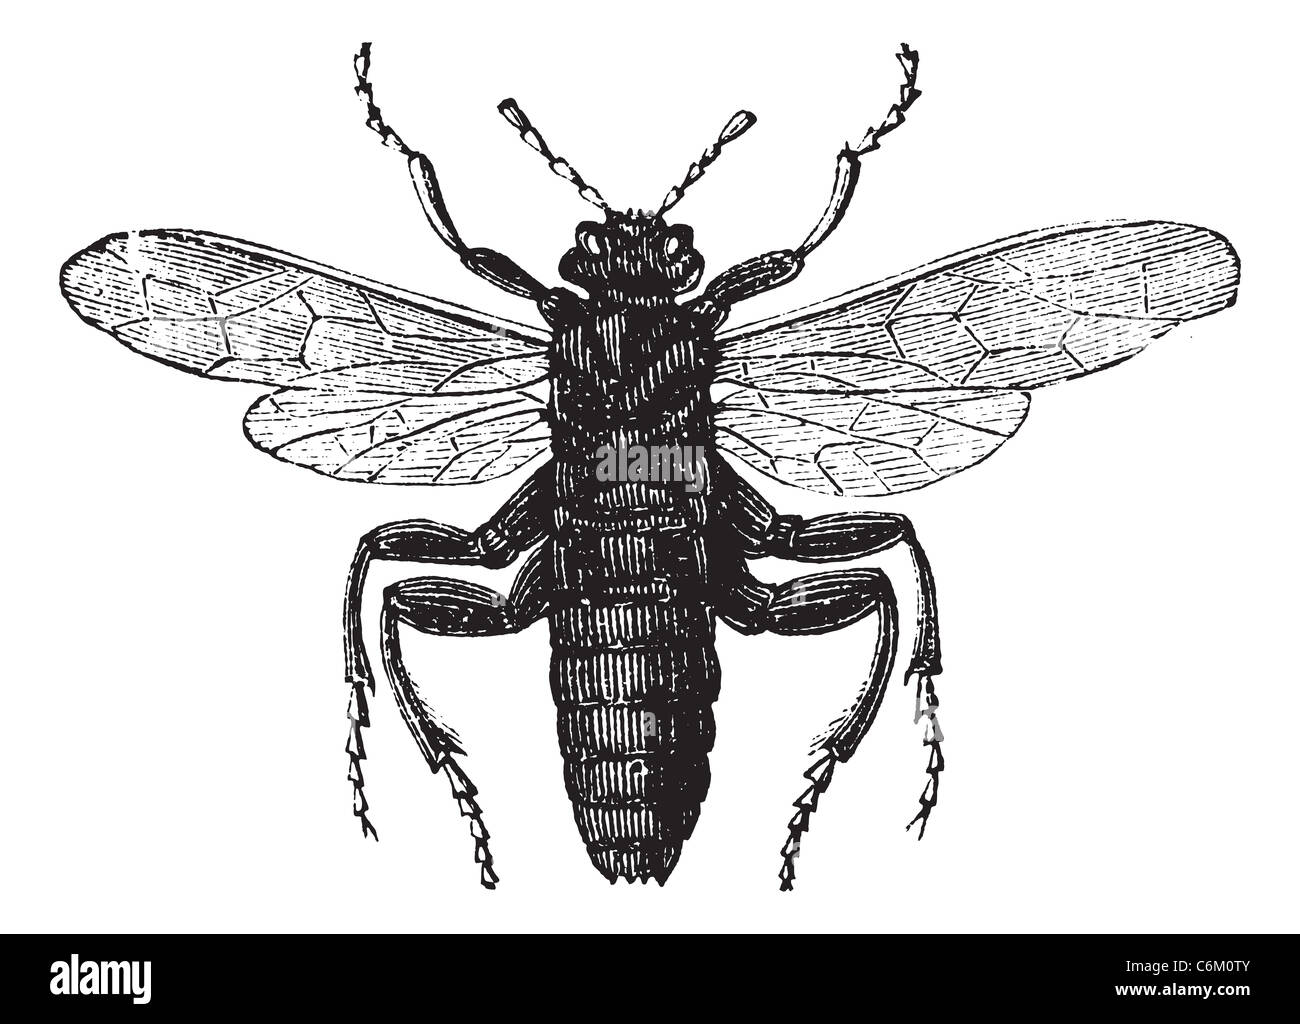 Elm Sawfly or Cimbex ulmi, vintage engraving. Old engraved illustration of an Elm Sawfly. Stock Photo